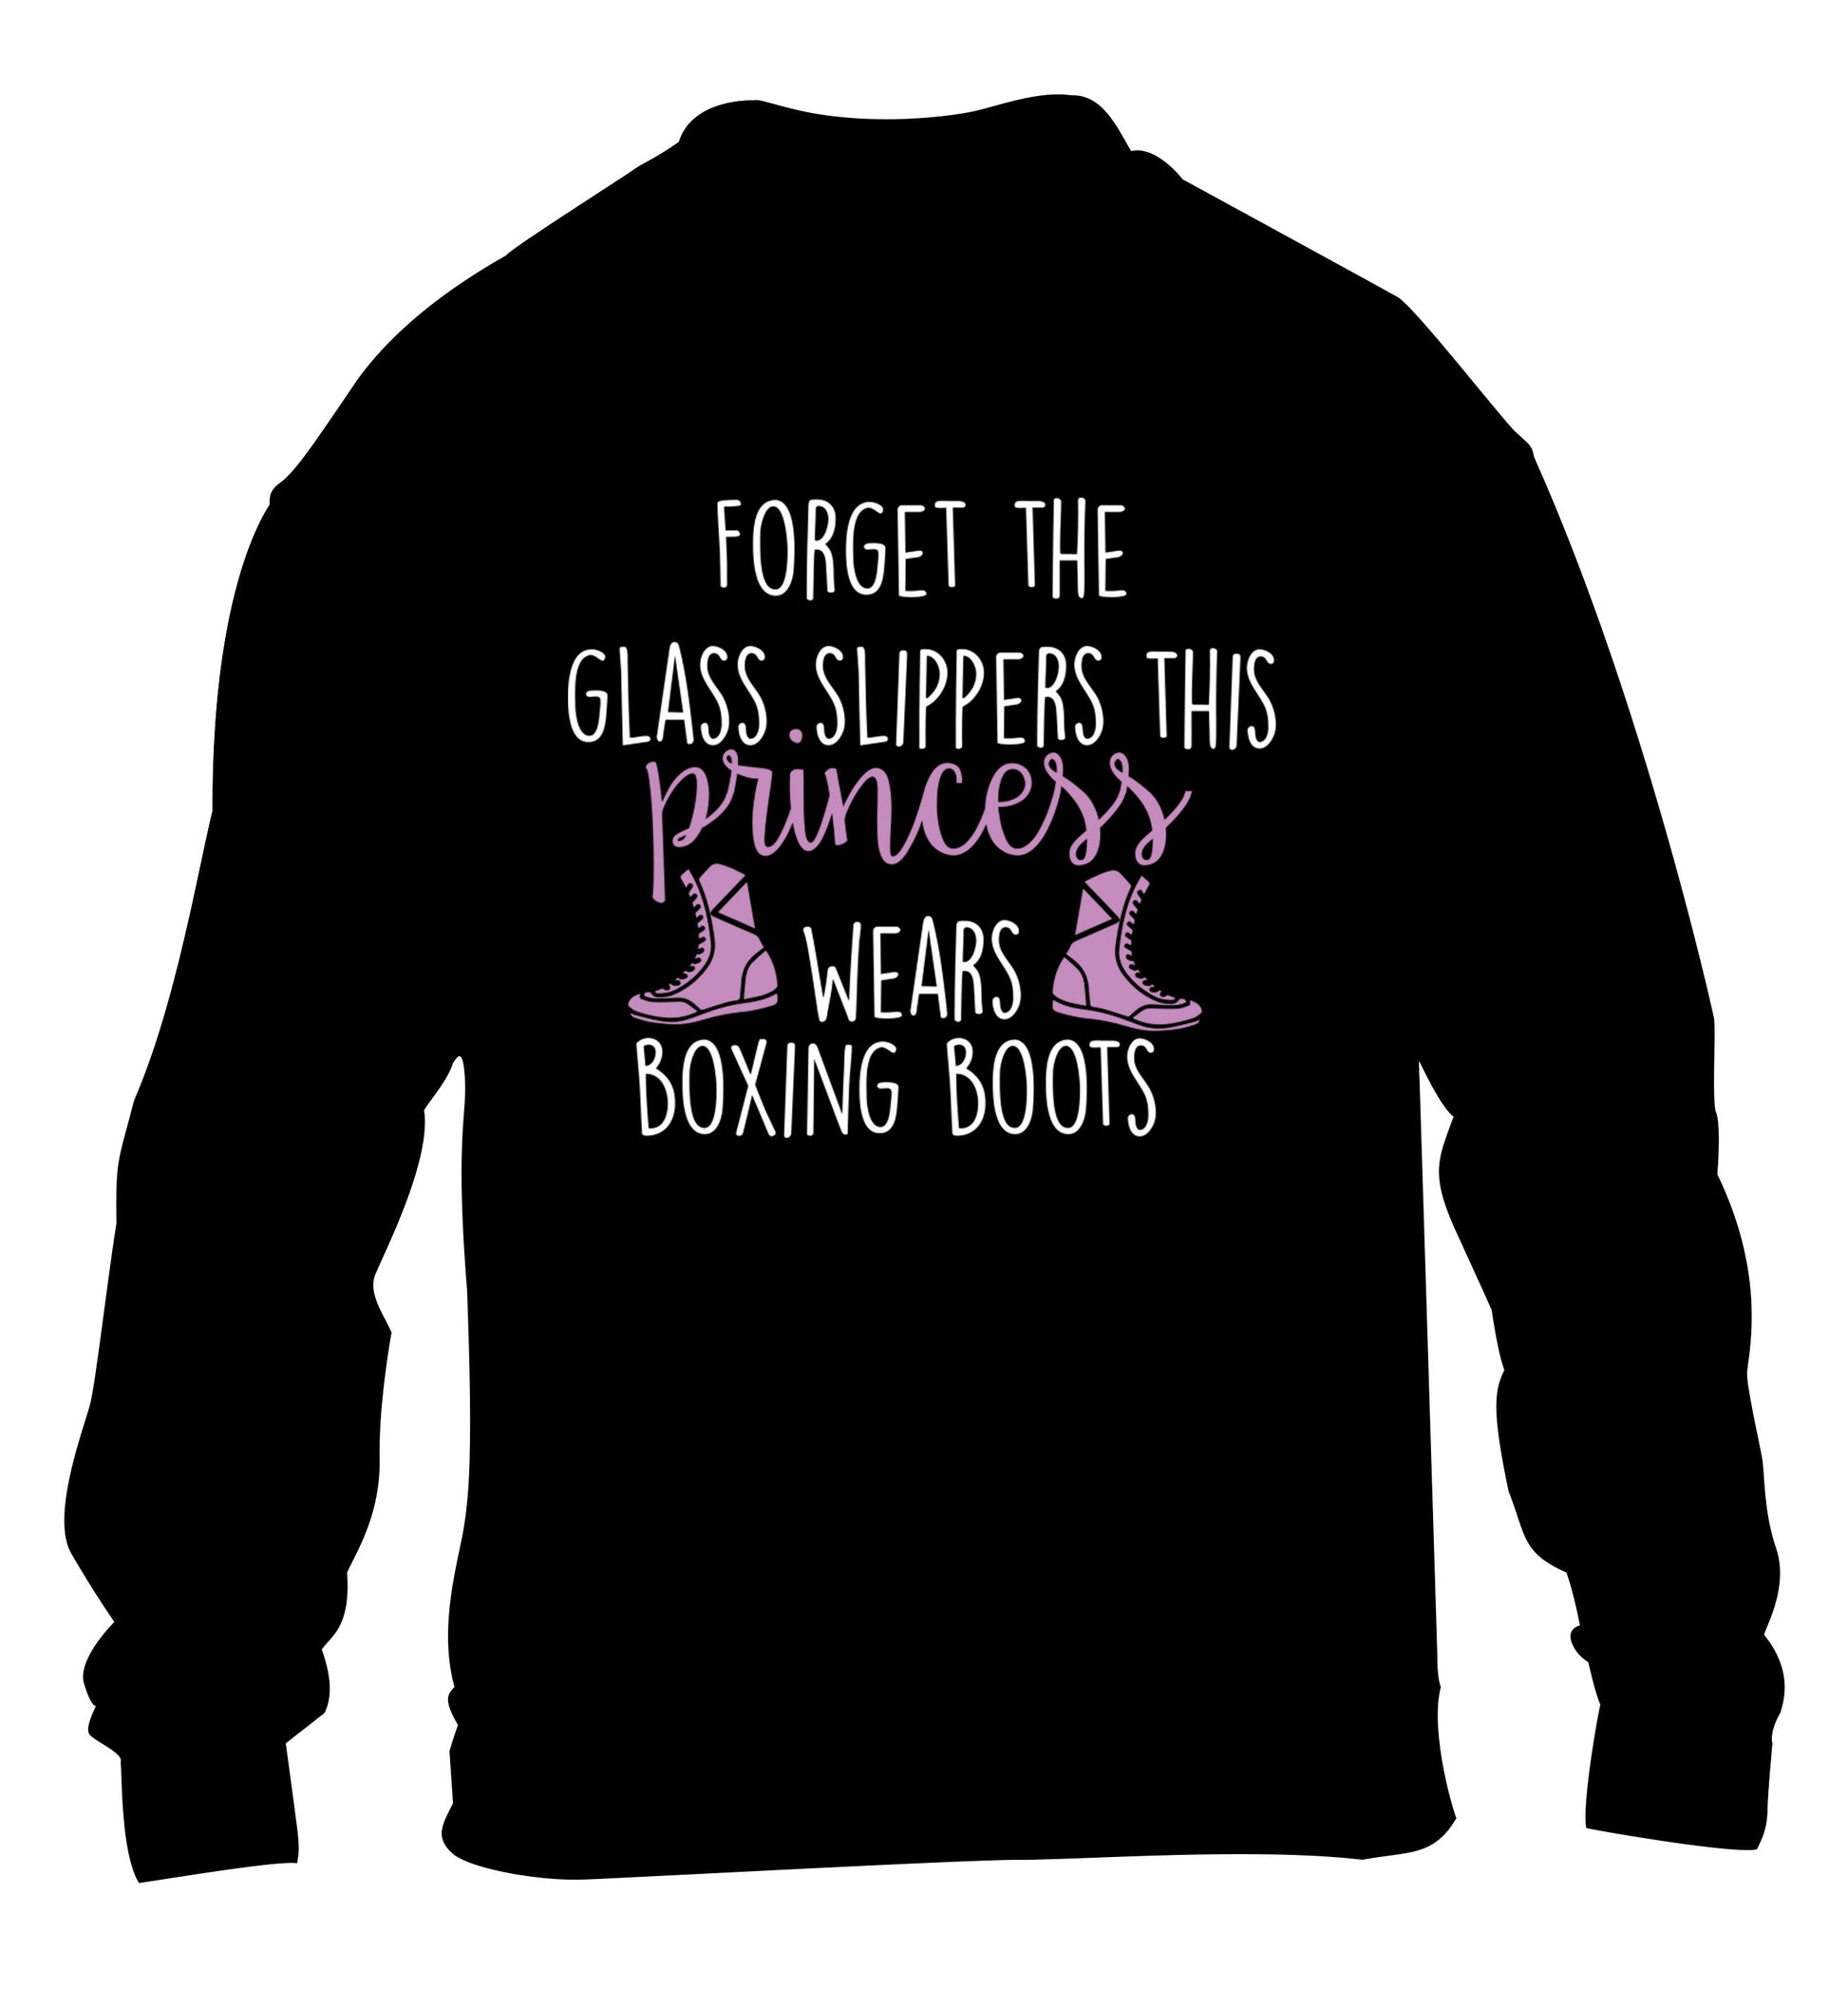 Forget the glass slippers this princess wears boxing boots children's black sweater 12-14 Years